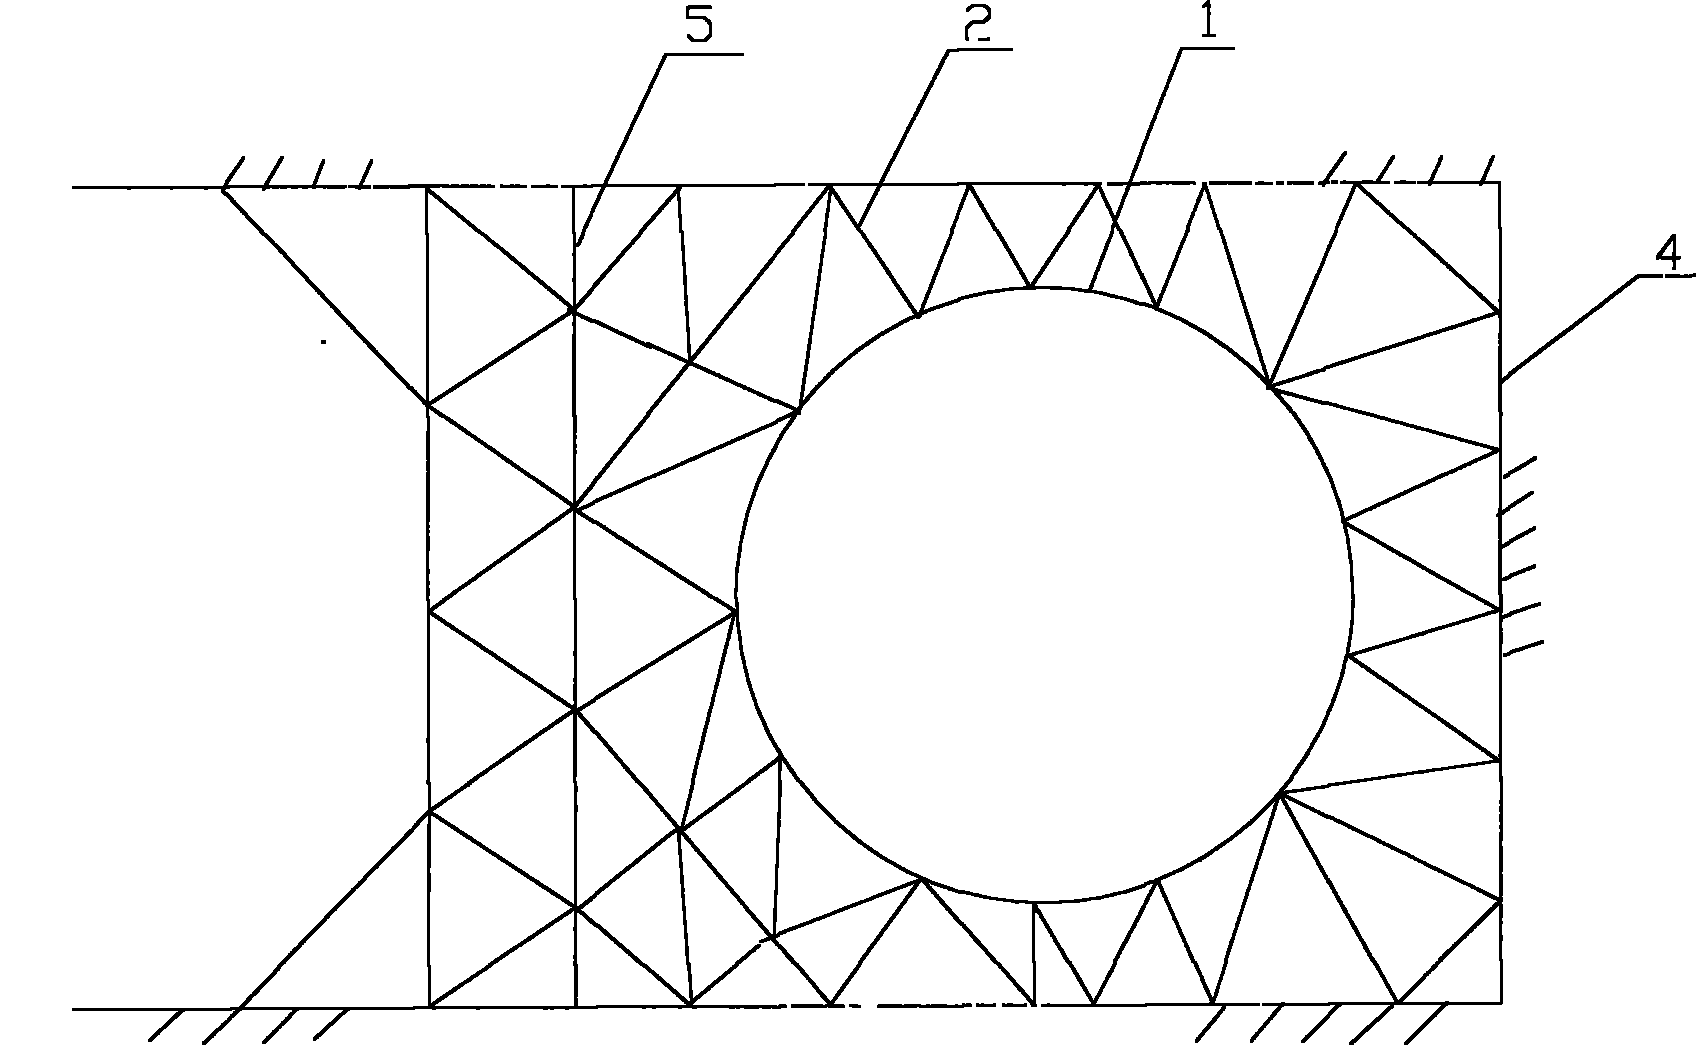 Circular inner support for deep foundation pit in unenclosed condition